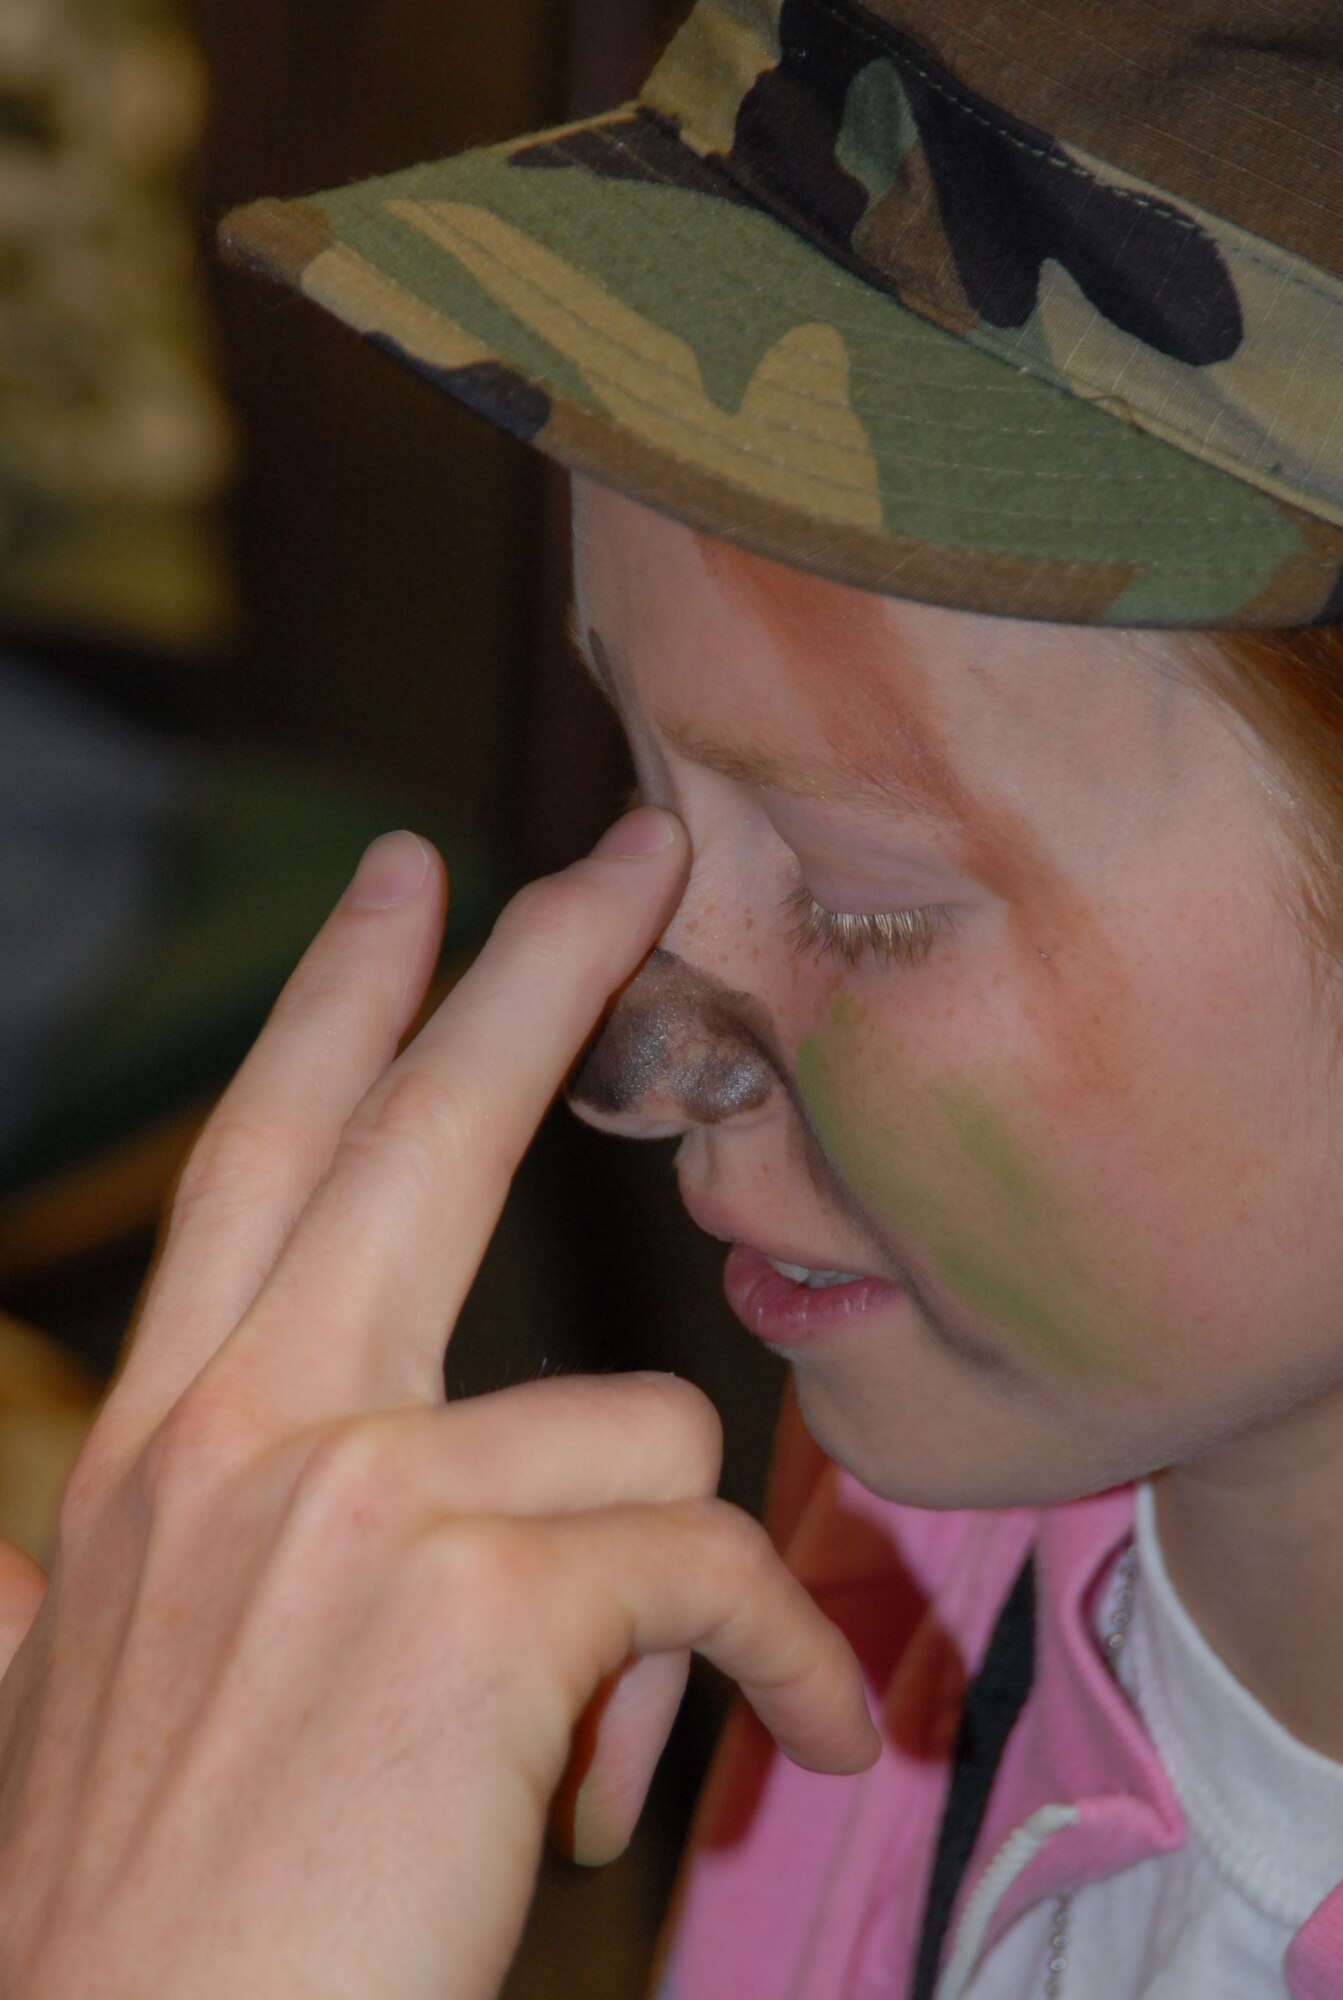 Caitlyn Lane, 11, has her face painted during Operation KUDOS at the Oasis Community Center on Saturday. (Photo by Airman Mikeal A. Young)